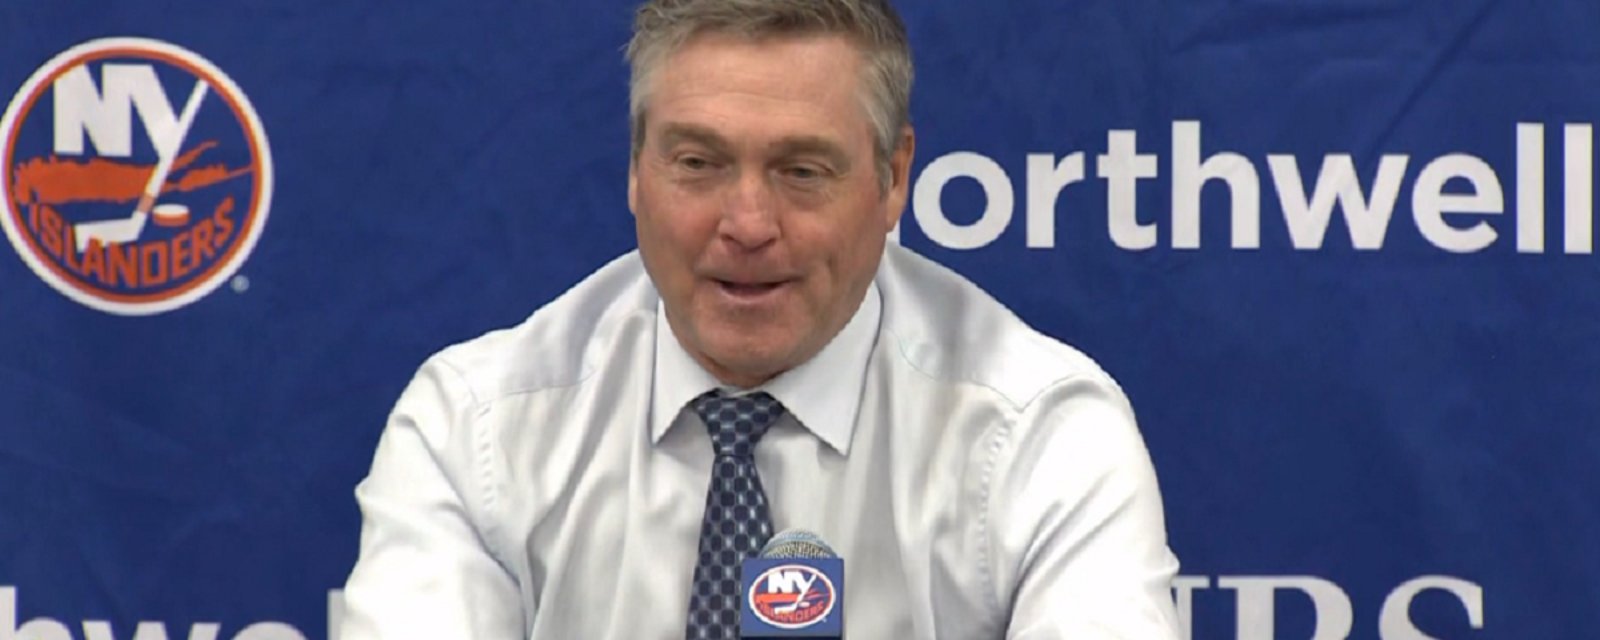 Patrick Roy drops legendary one-liner in post-game interview.